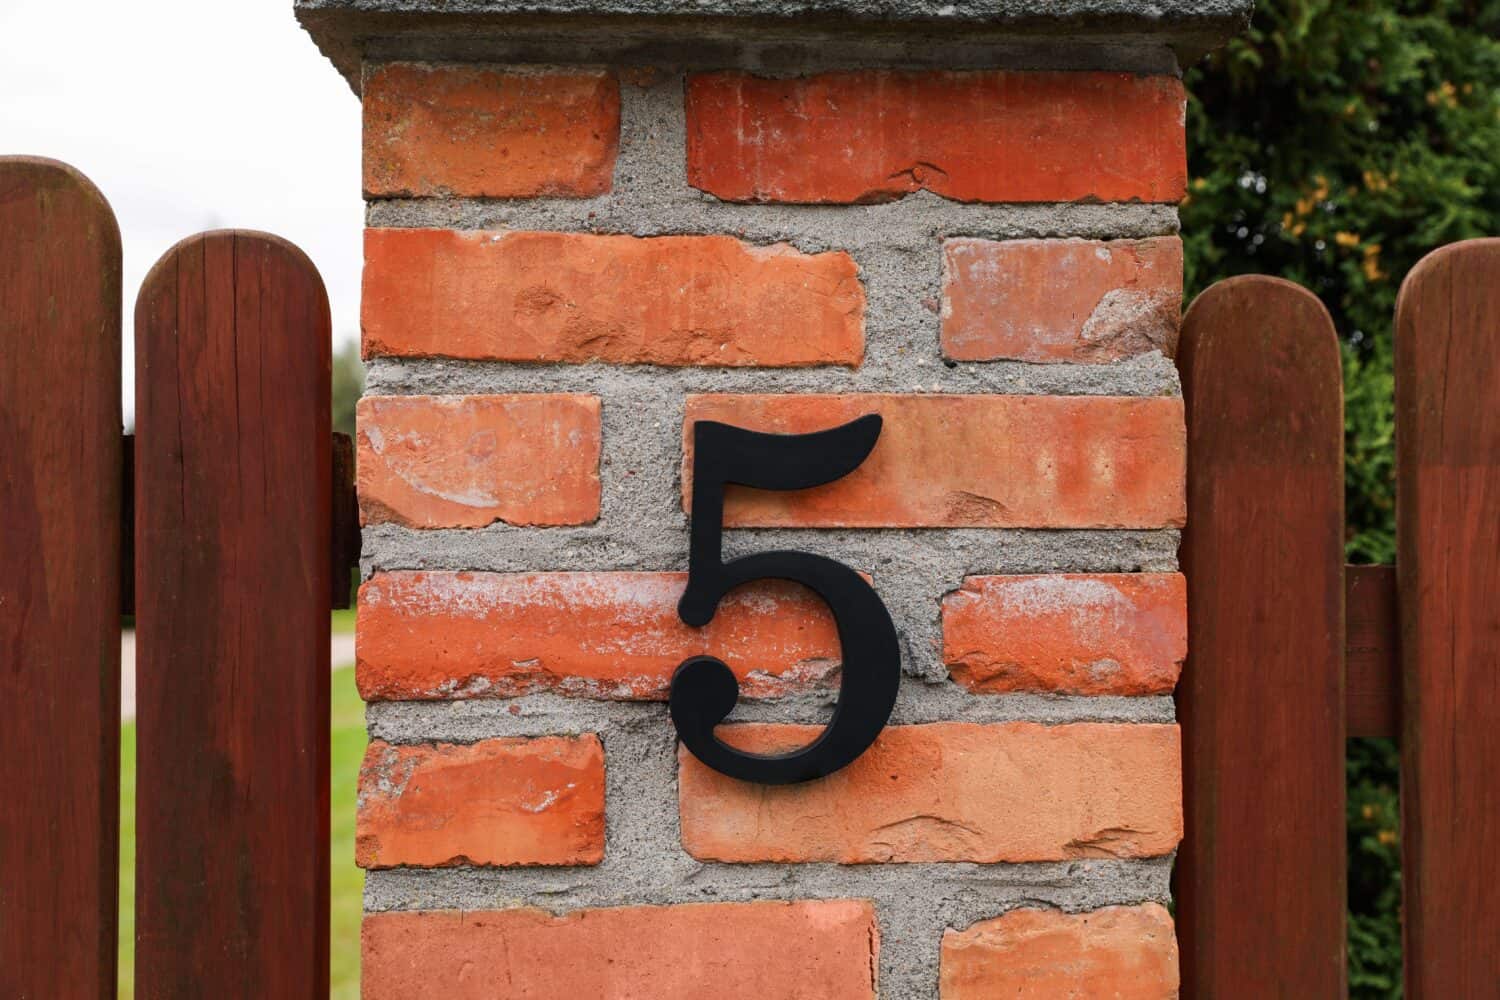 House number 5 on red brick column outdoors